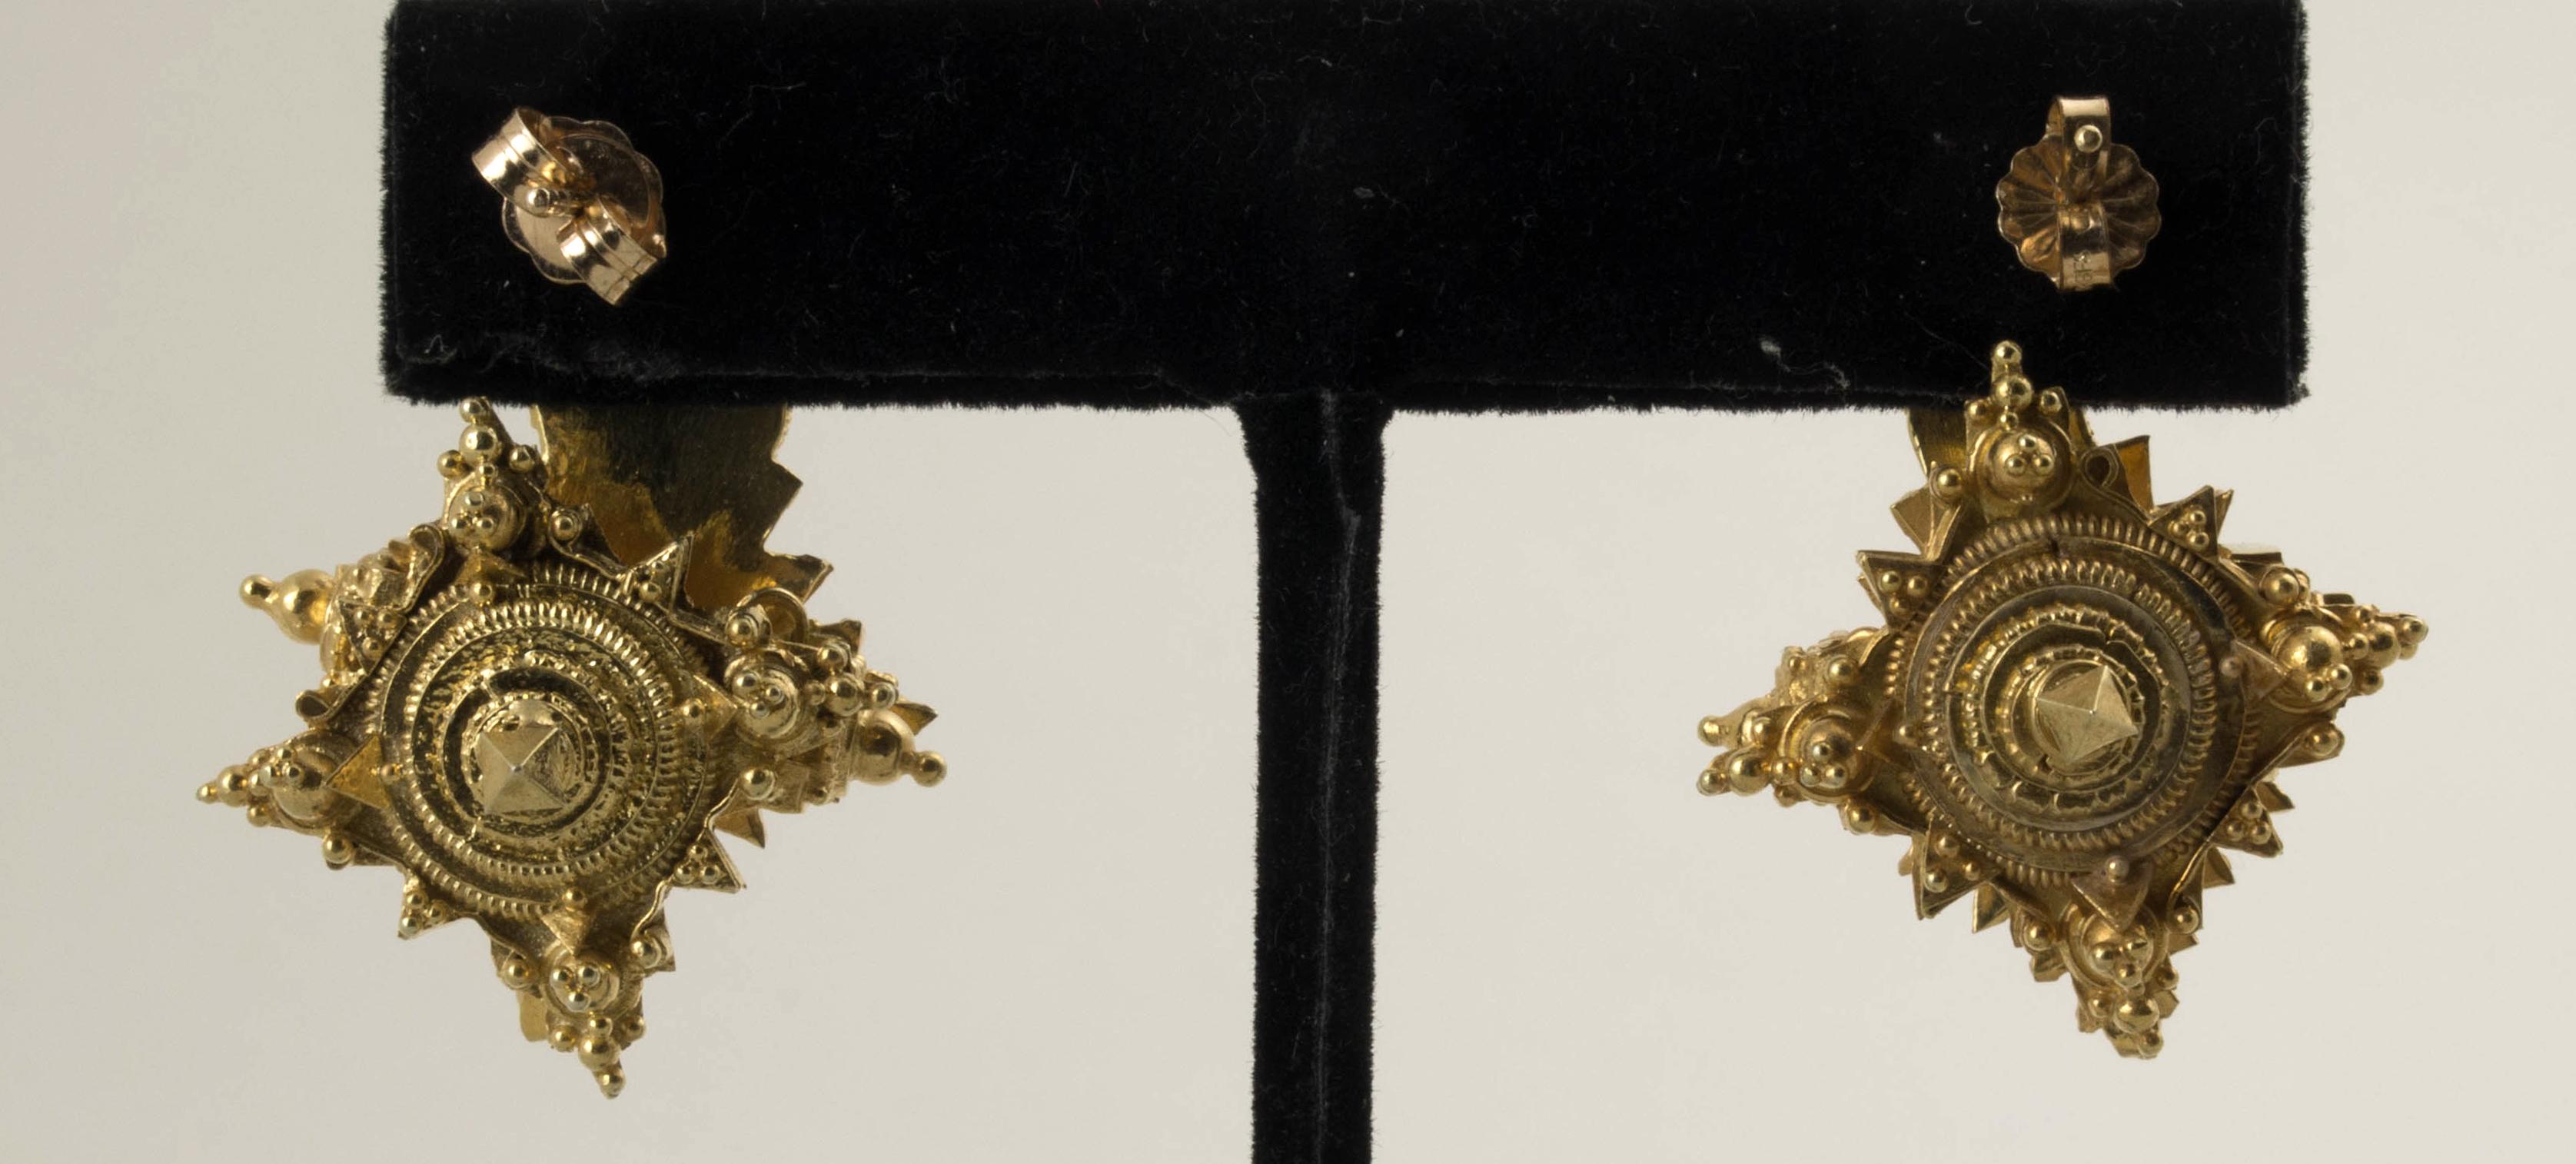 Antique Javanese 22k Gold Conch Shaped Earrings, 10th-15th Century, Indonesia For Sale 4